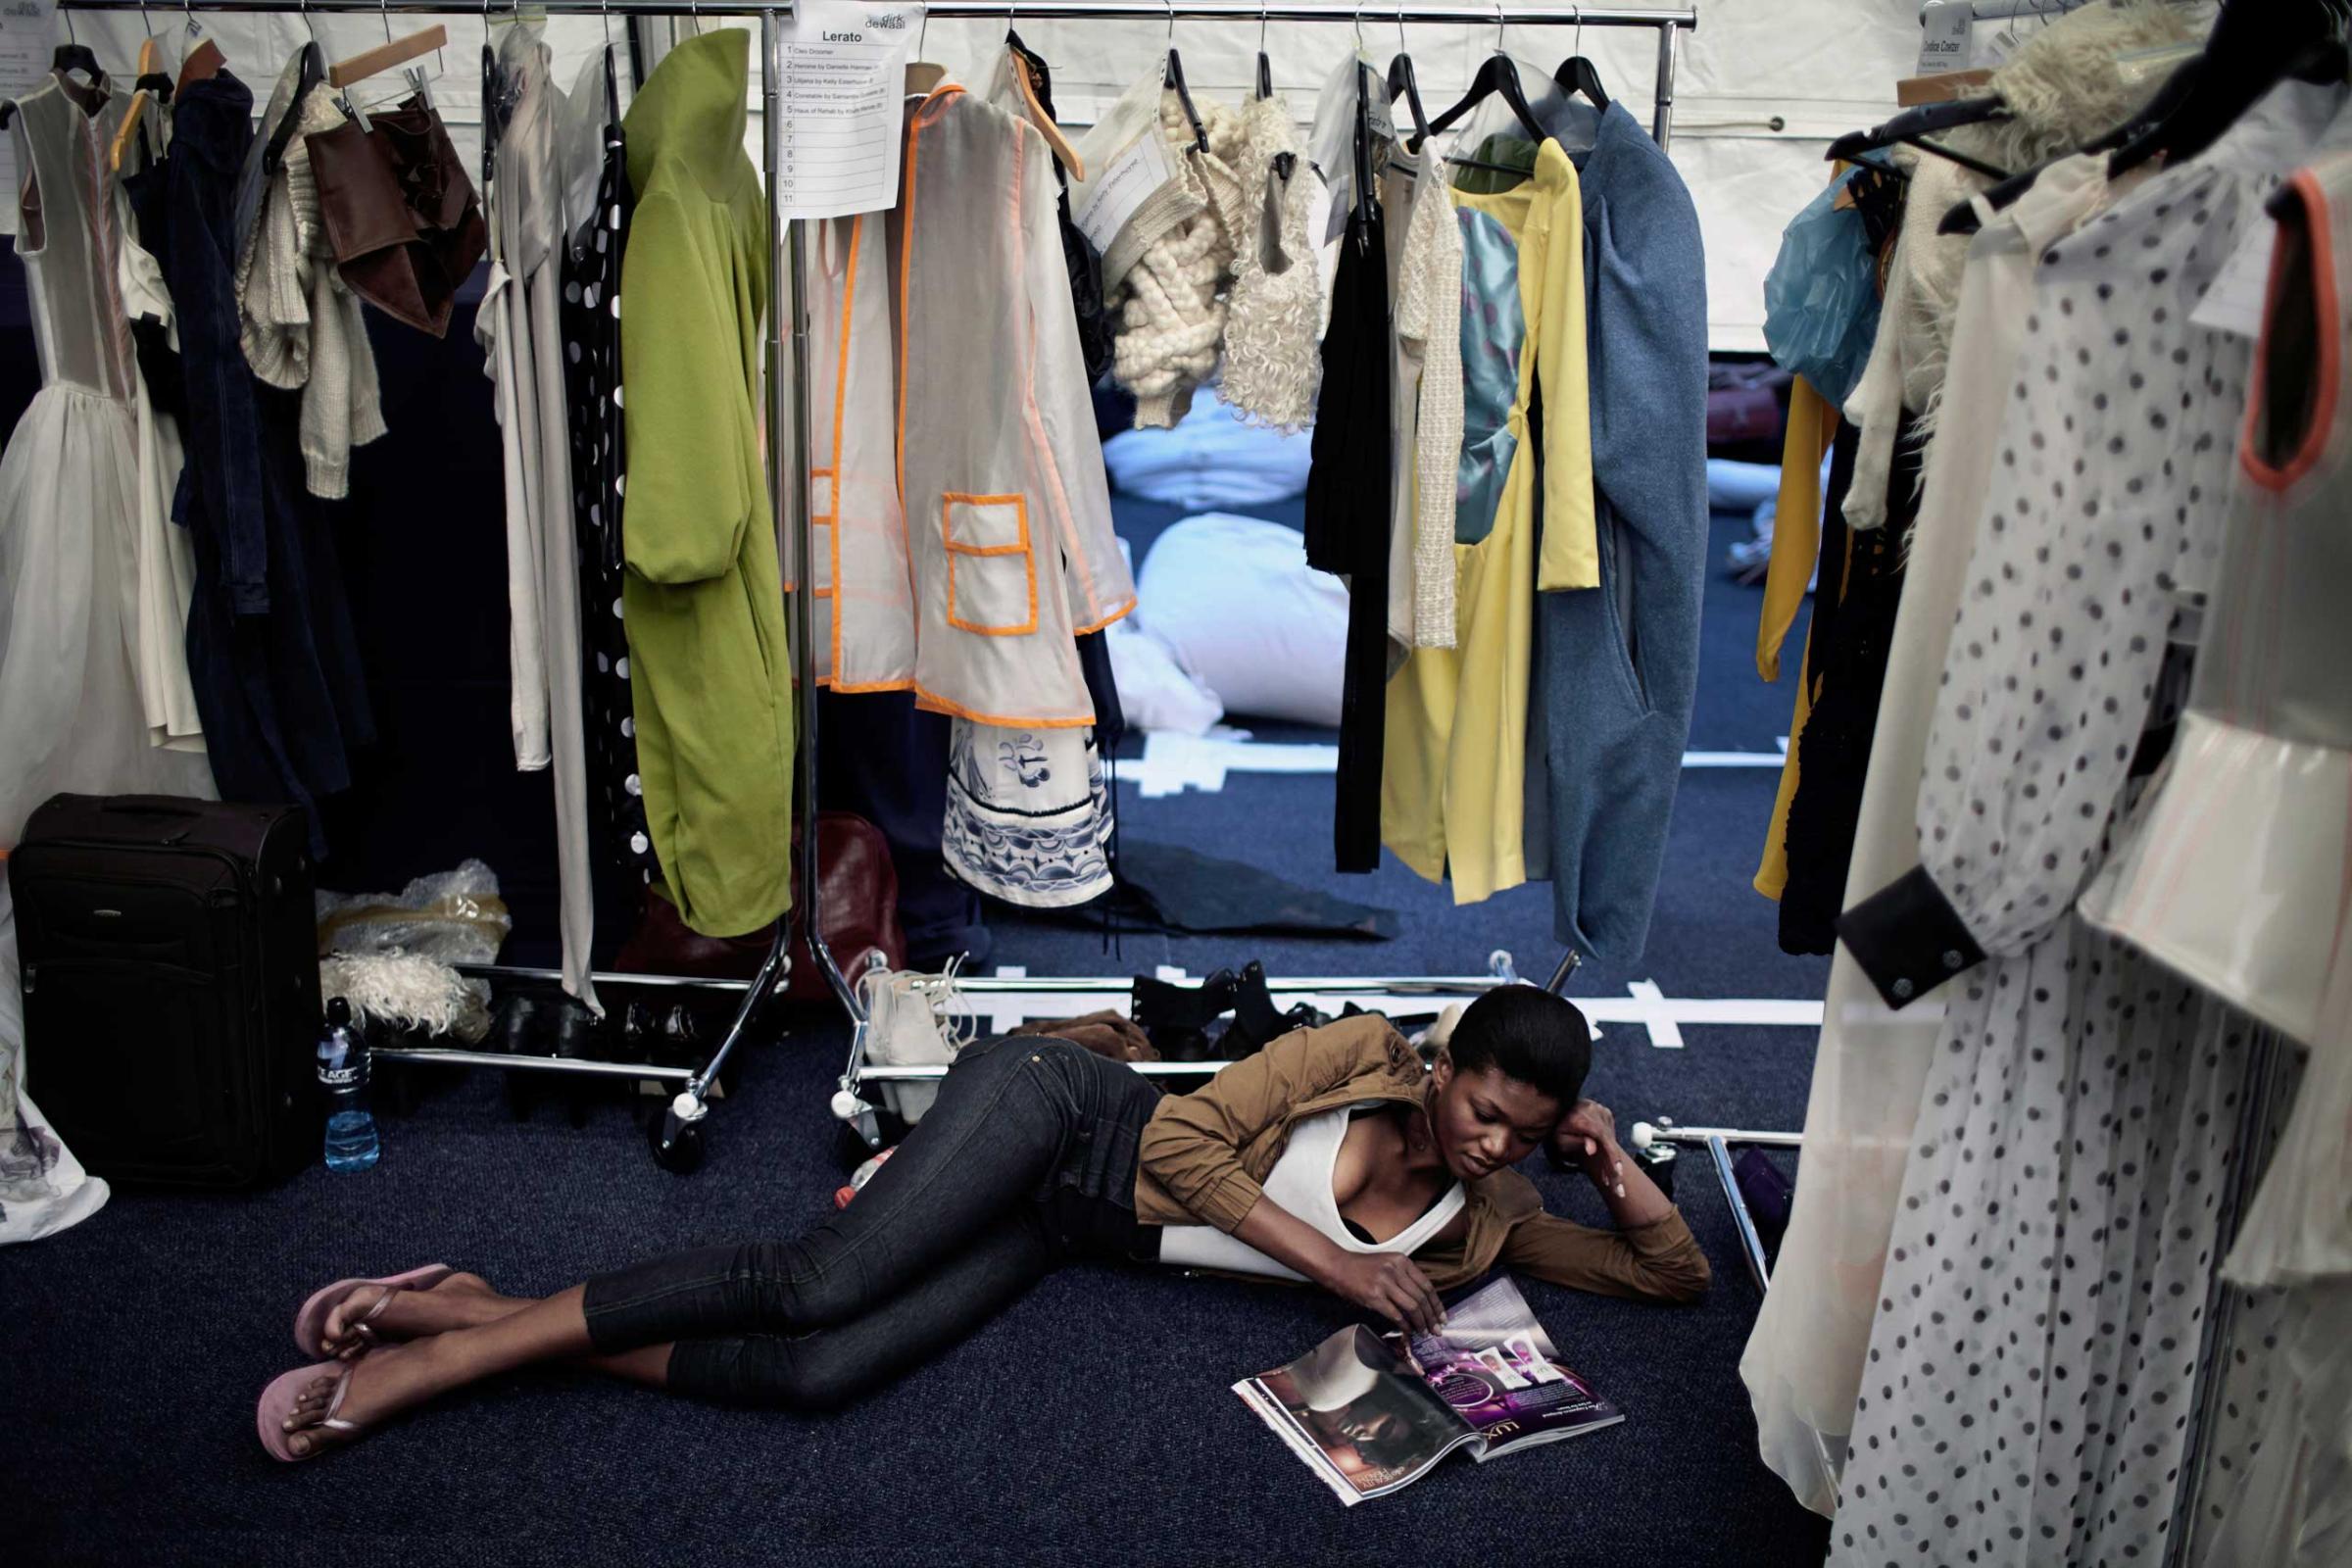 A models reads a fashion magazine backstage before a fashion show at South Africa Fashion Week on Sept. 22, 2011 held in Johannesburg, South Africa.